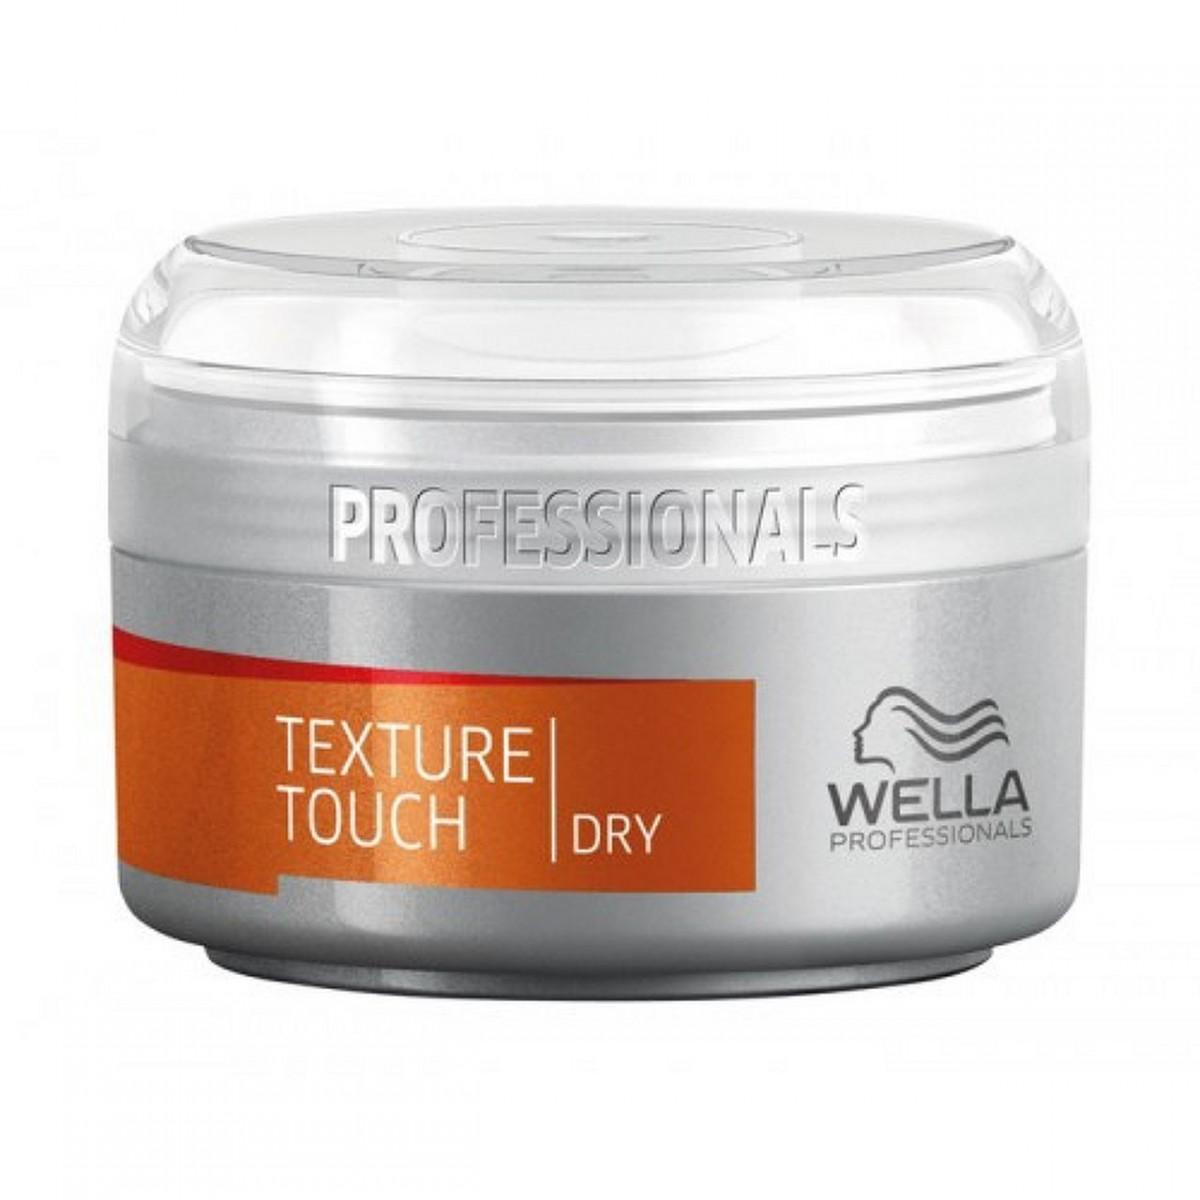 wella-texture-touch-moldable-paste-75ml